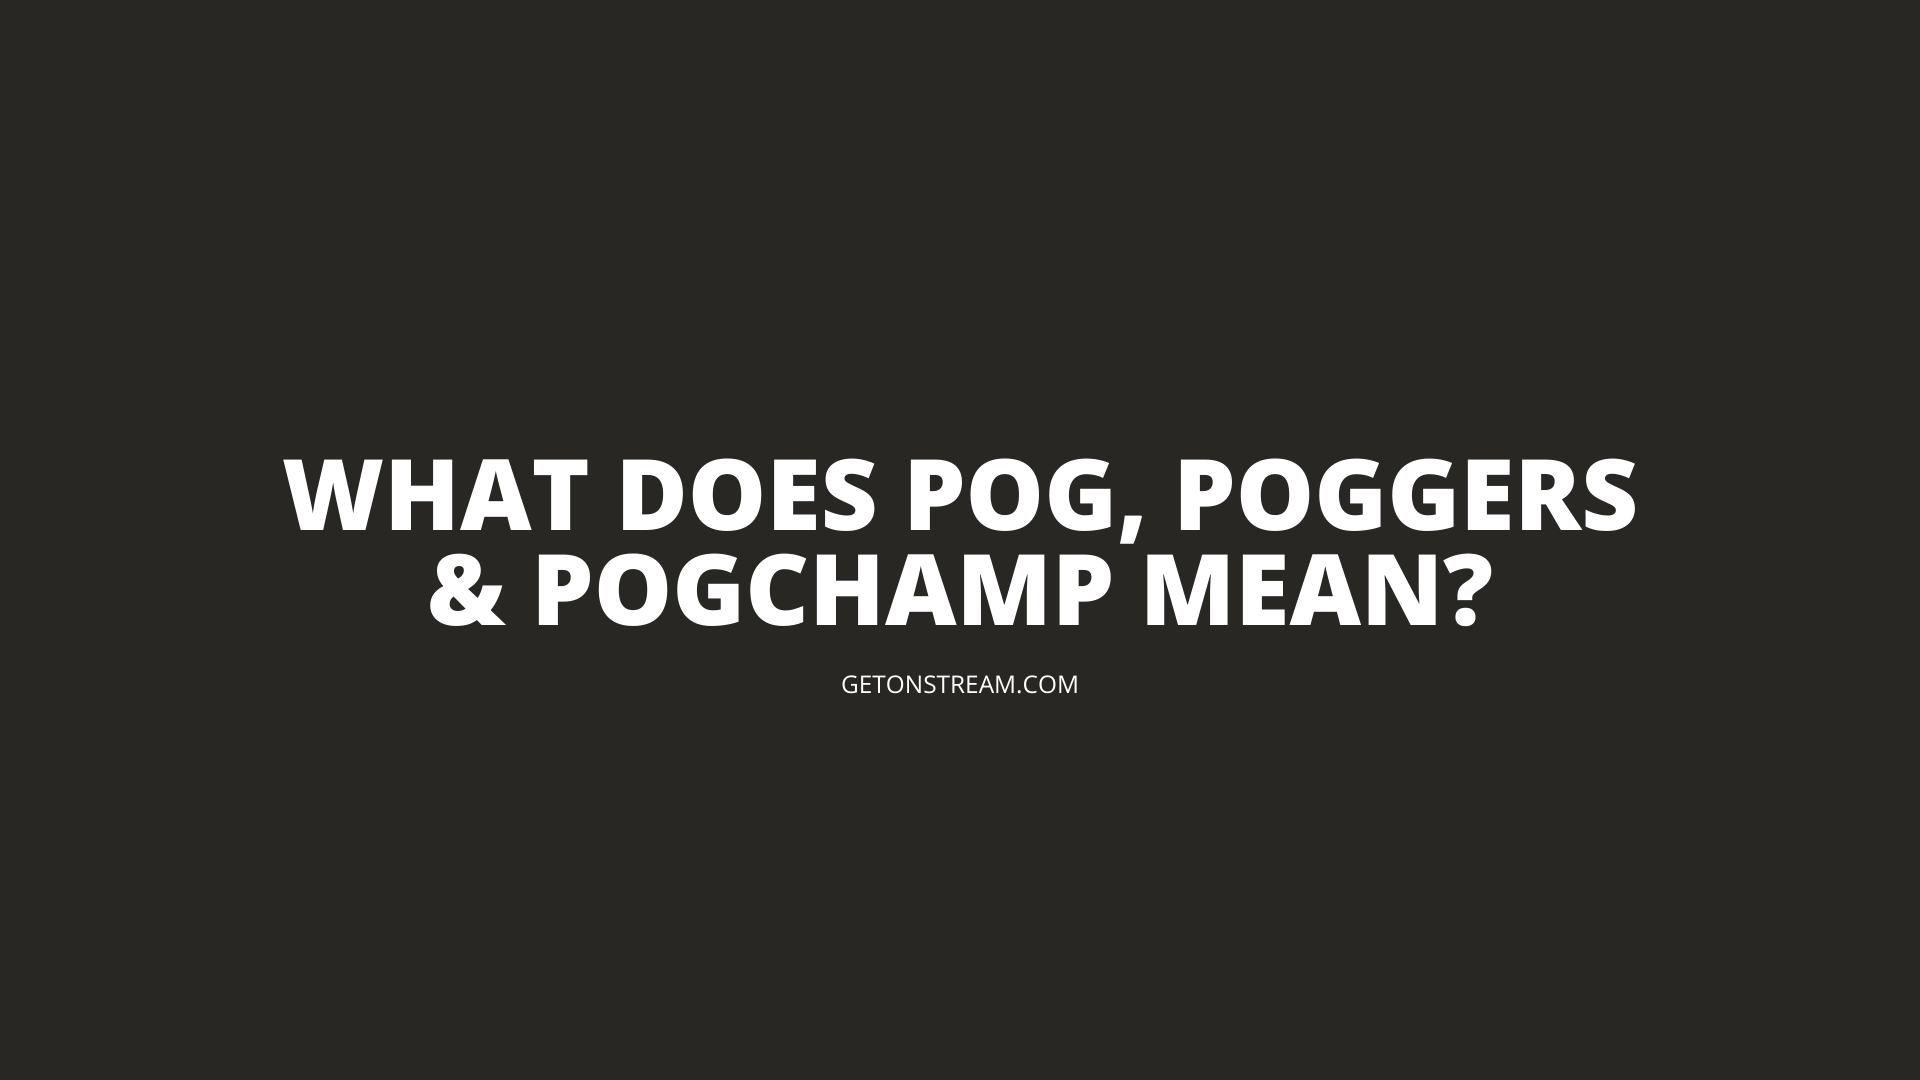 Means chat pog Pogging: what